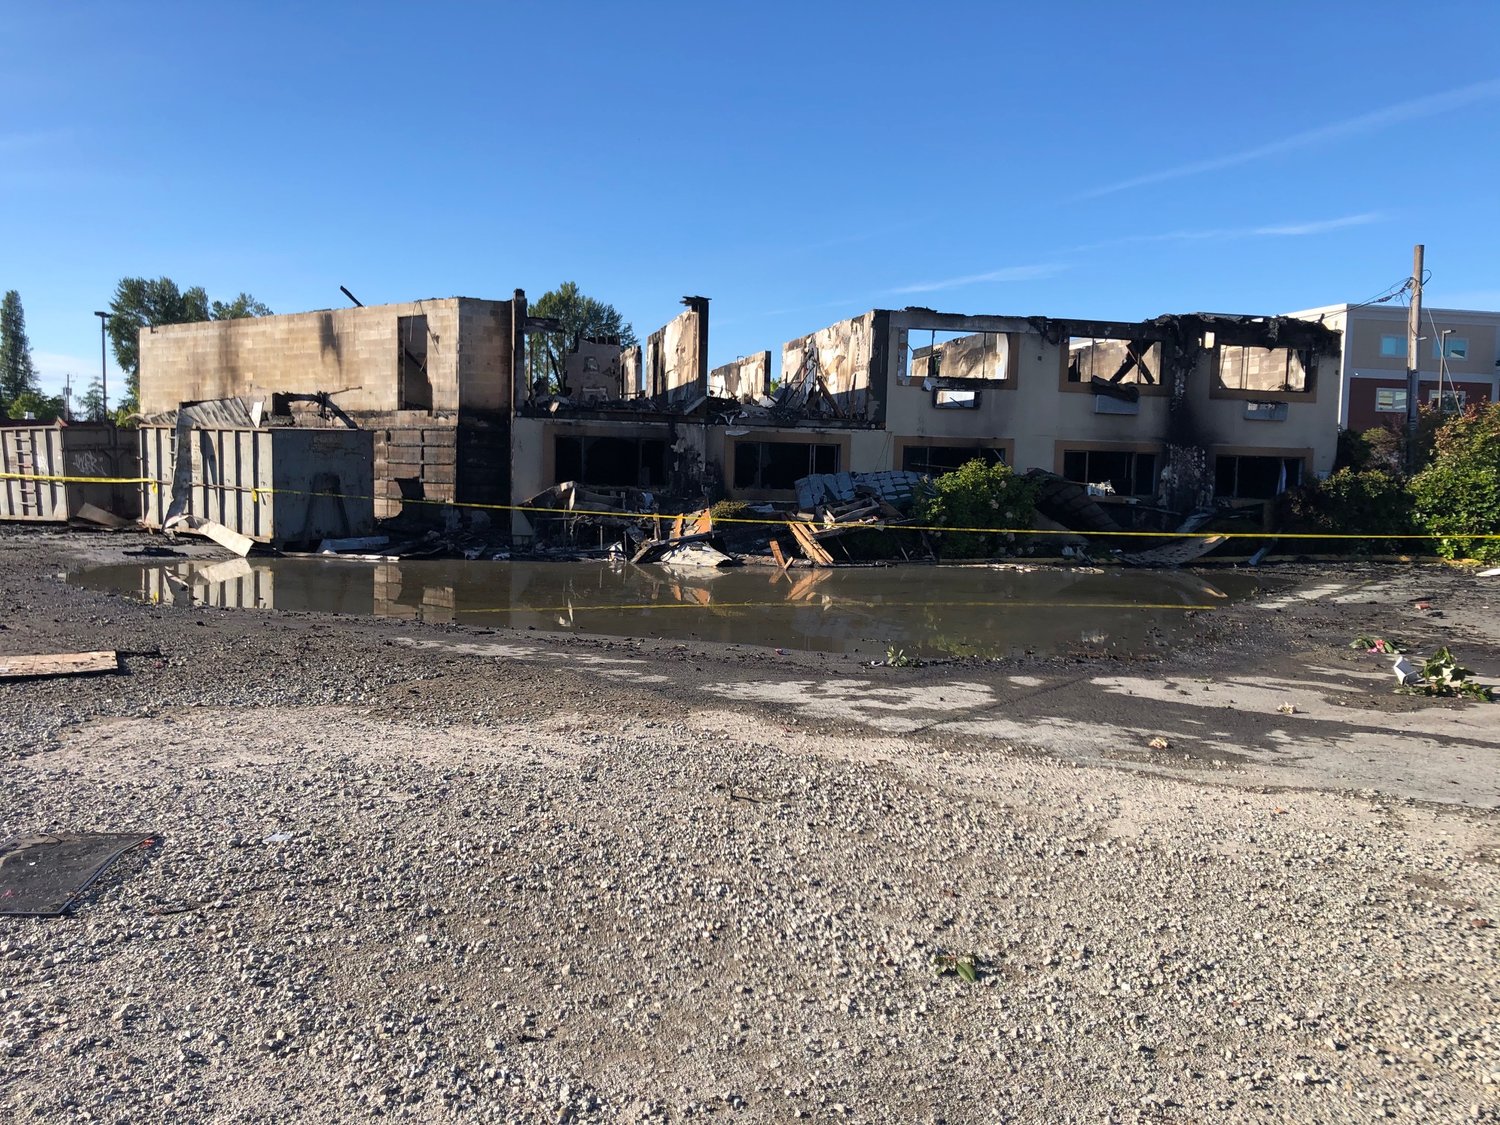 This is another view of the north building at the former Quality Inn at 1211 Quince St. SE in Olympia. The photo was taken Sun., May 30, 2021.